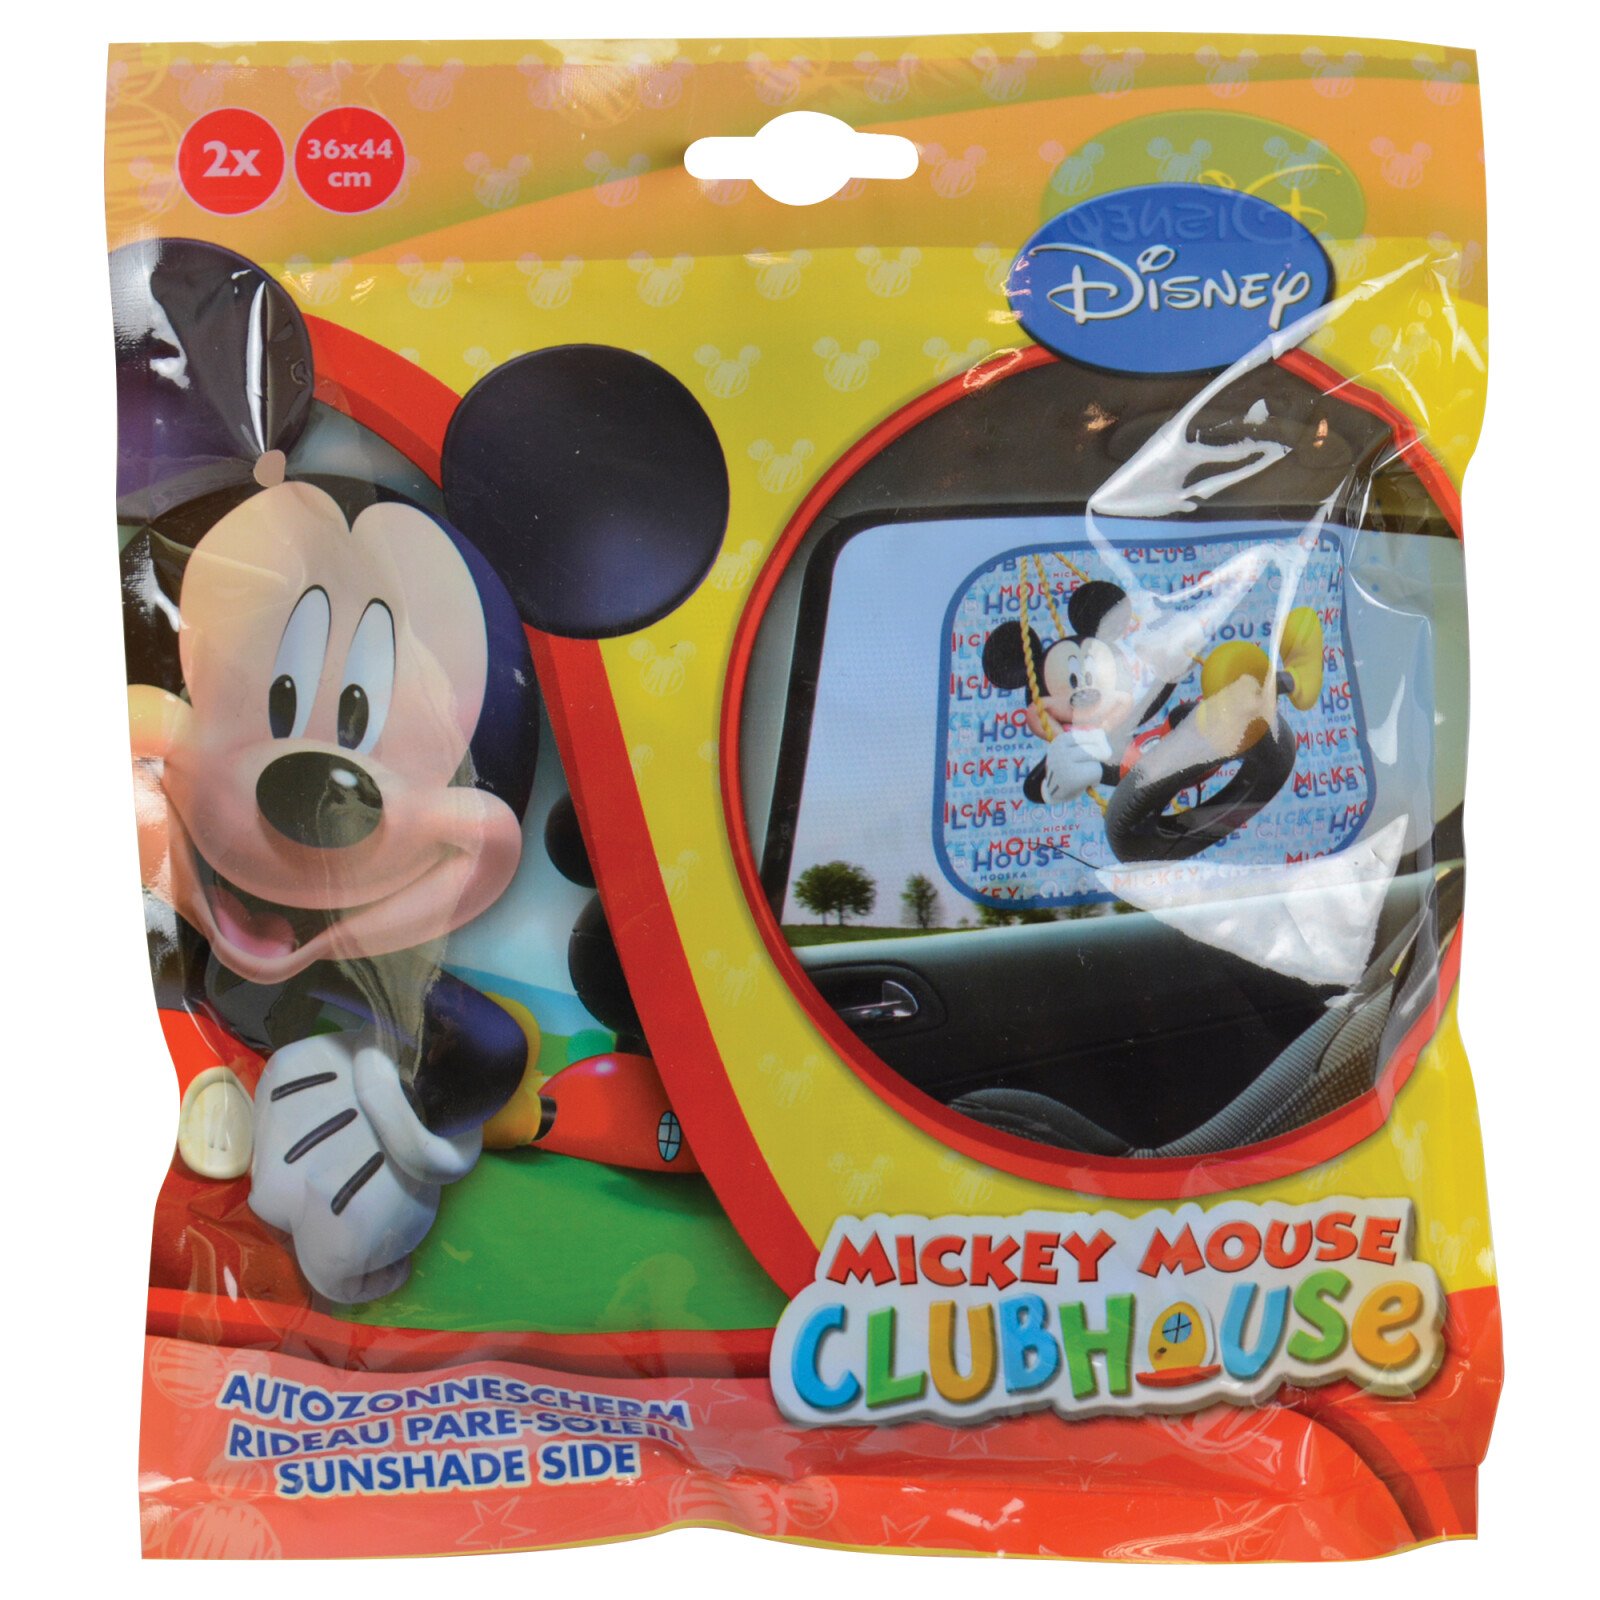 Disney side sunshades with suction cups 2pcs - Mickey 2 thumb